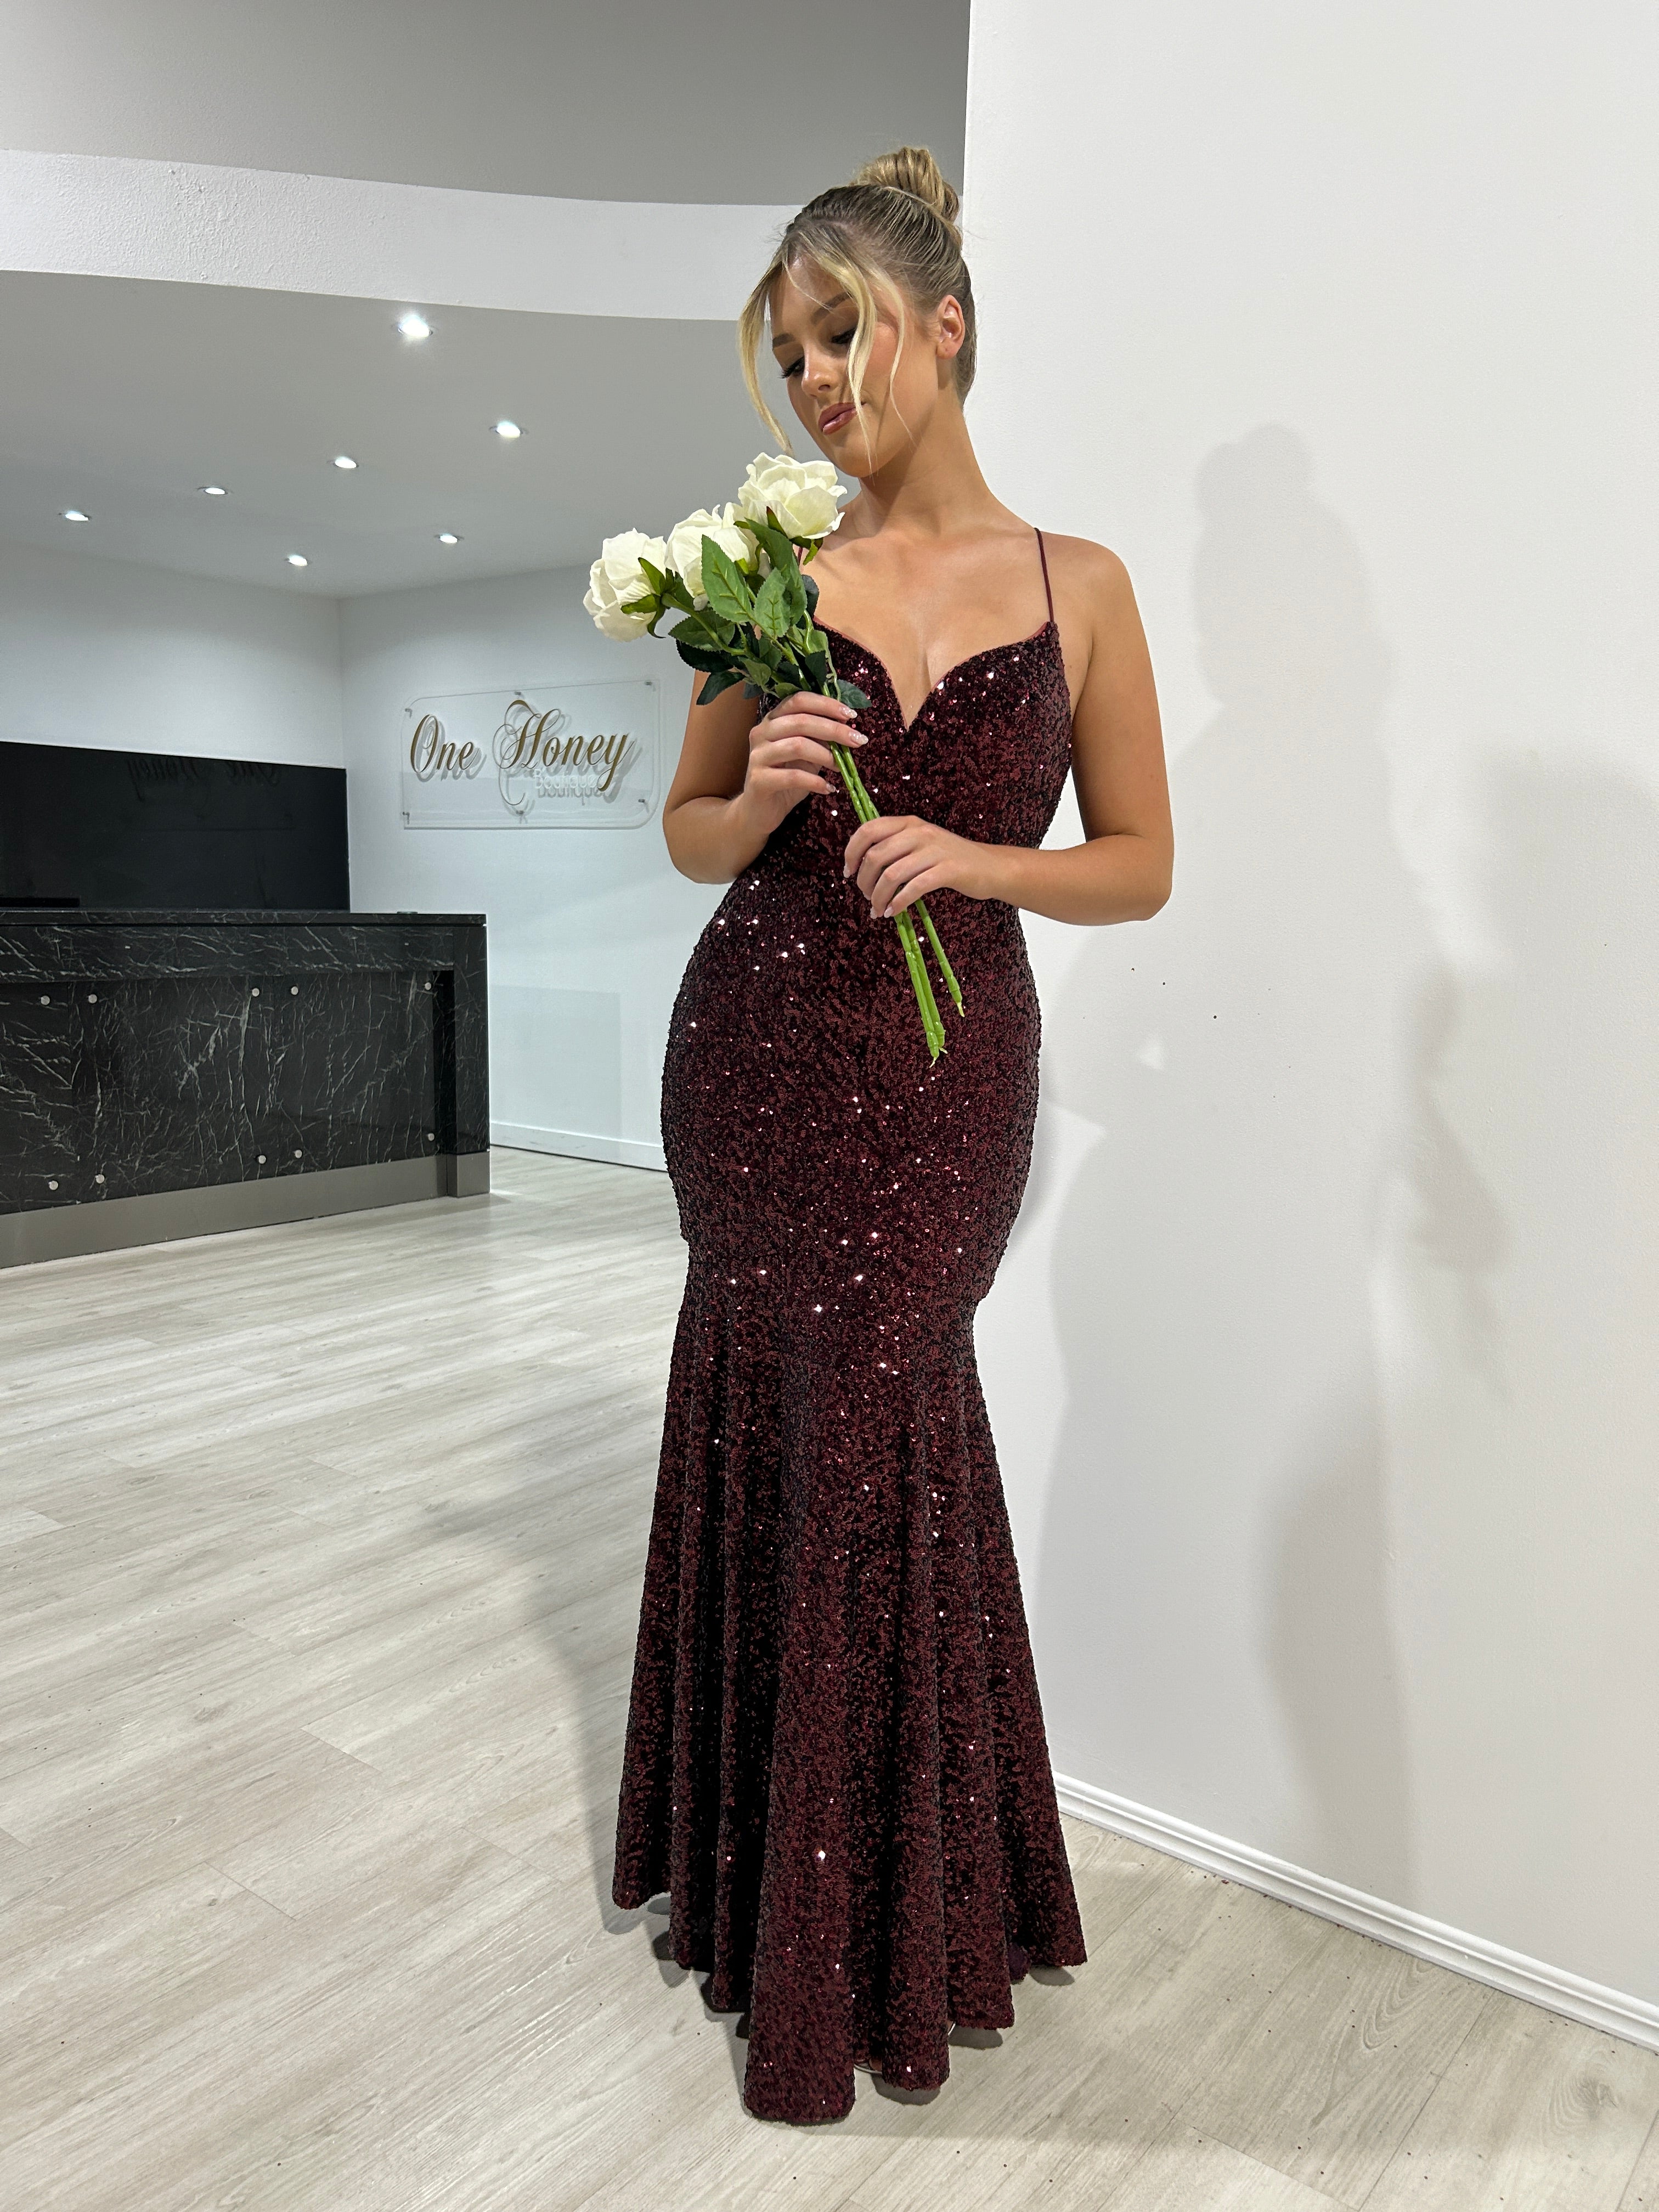 Honey Couture NORMA Burgundy Sequin Mermaid Formal Dress